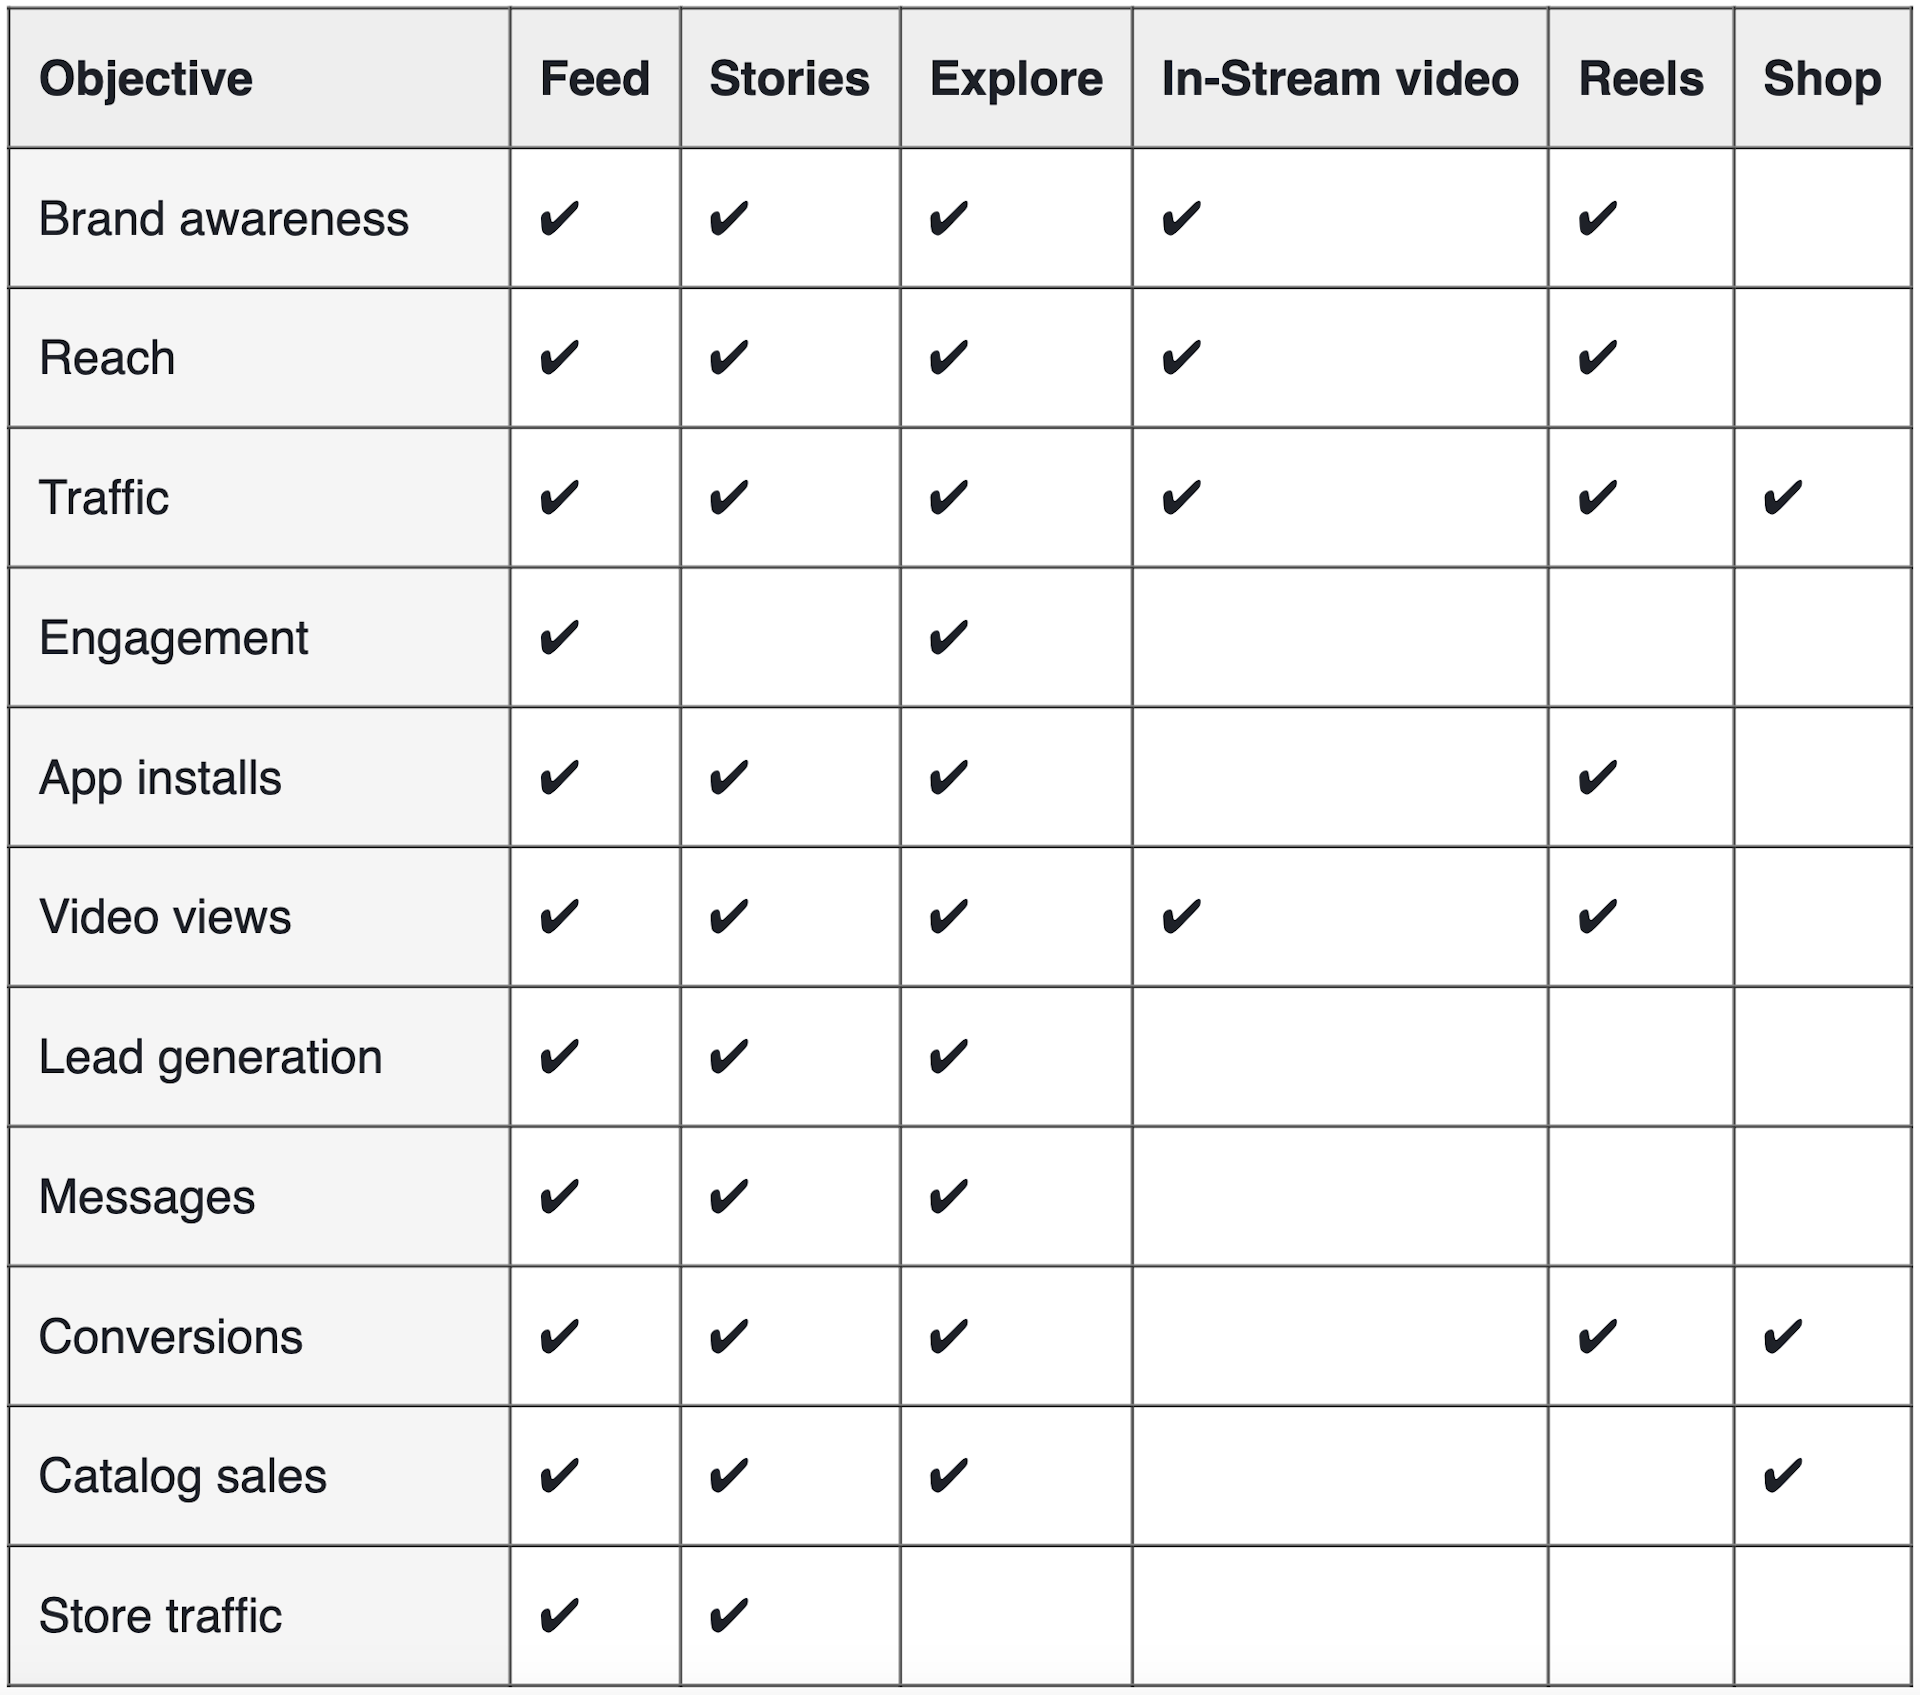 A chart showing Instagram's 2023 ad objectives